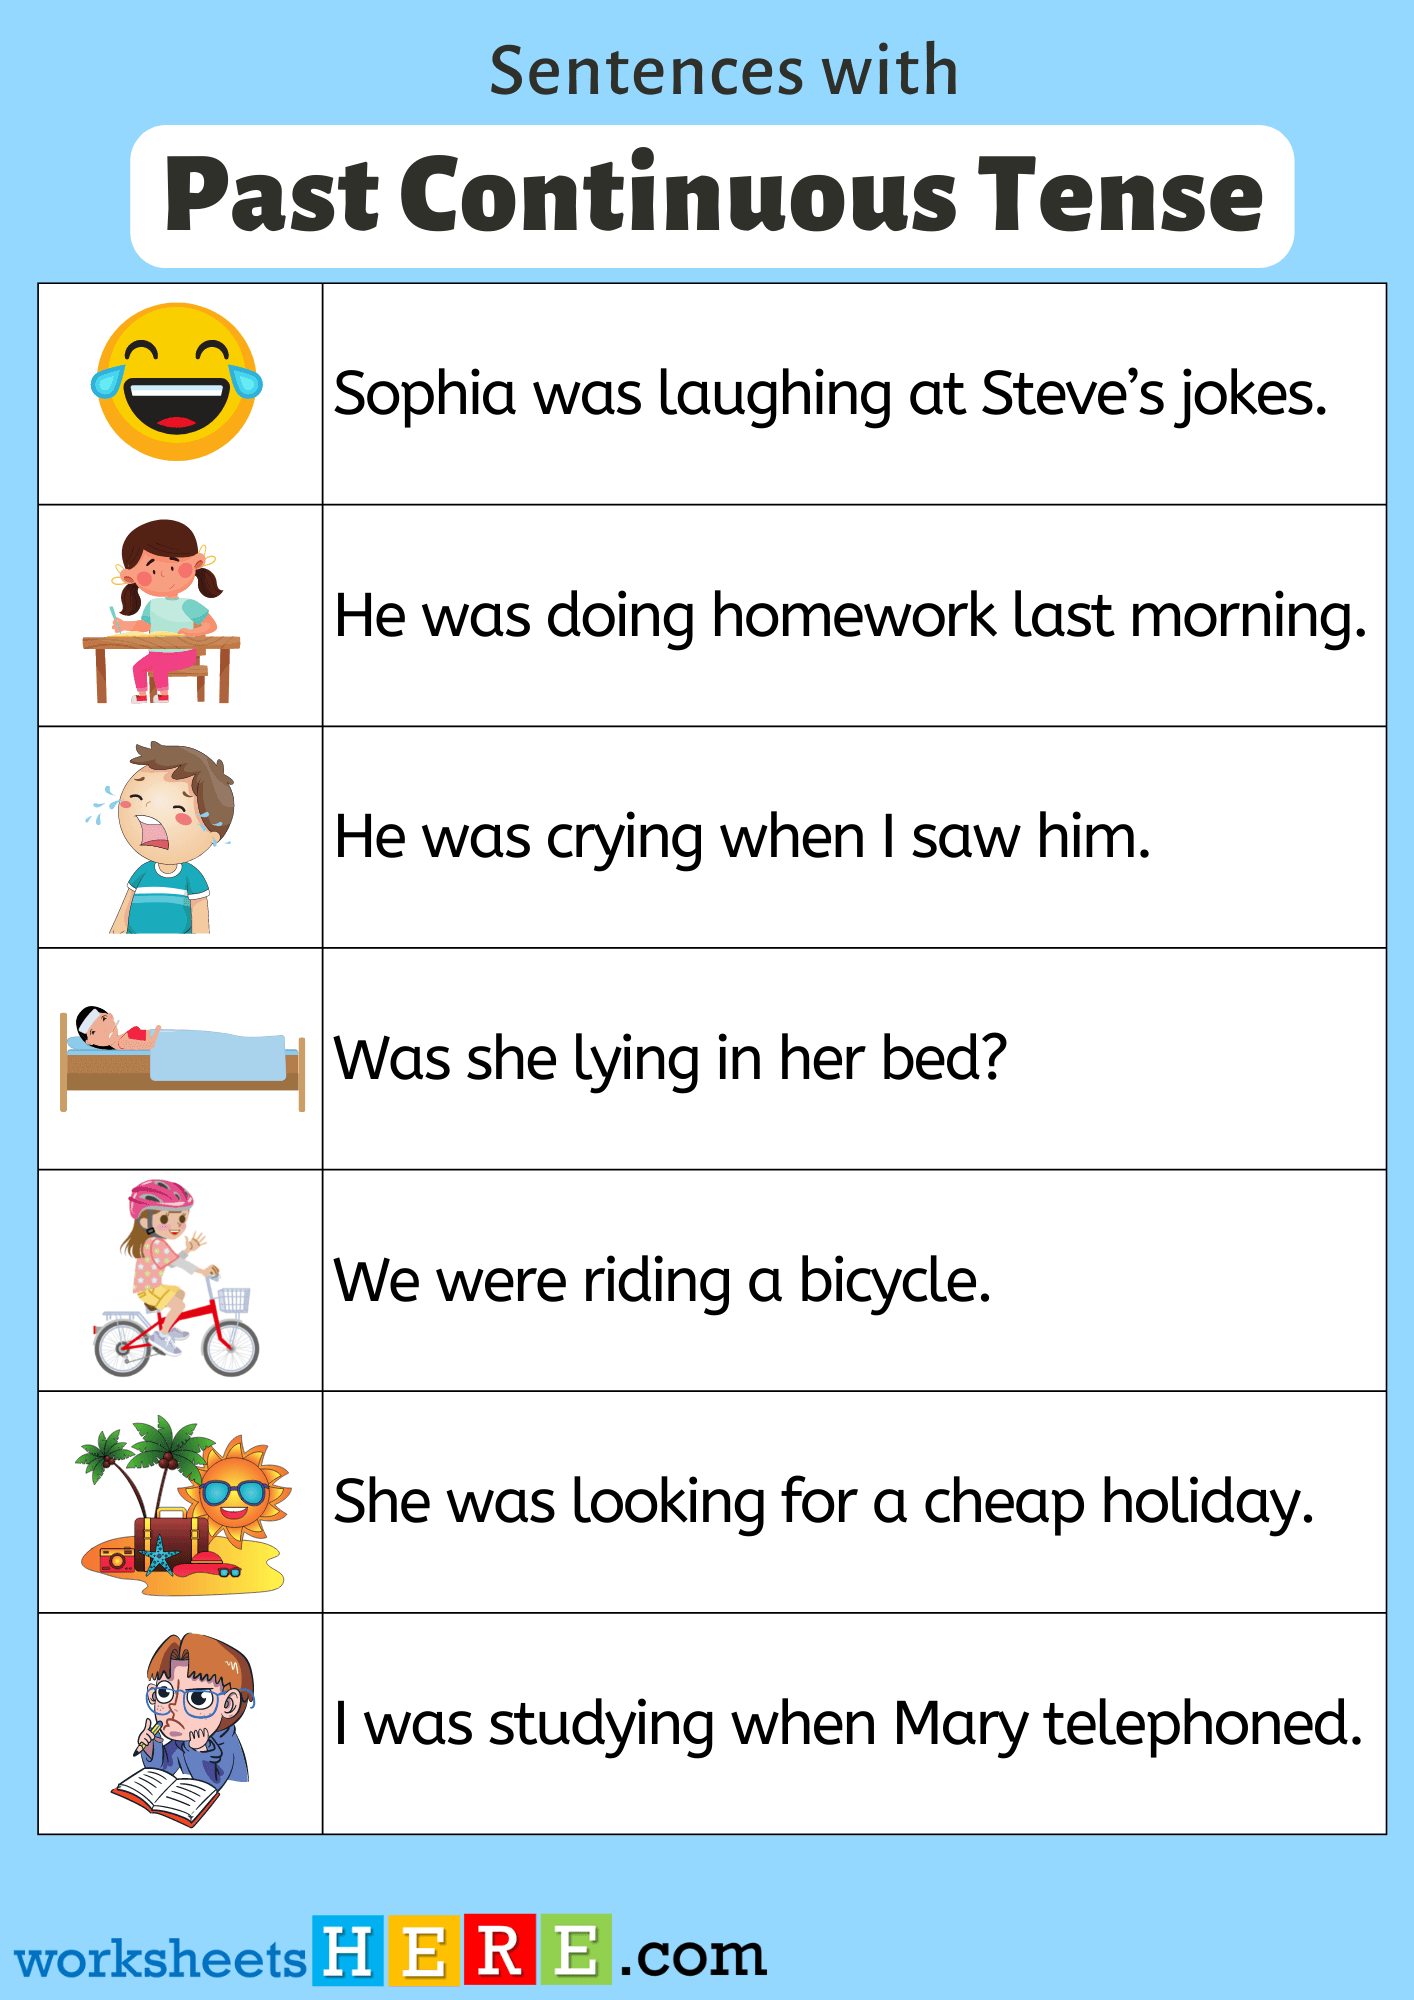 Sentences with Past Continuous Tense Examples with Pictures PDF Worksheet For Students